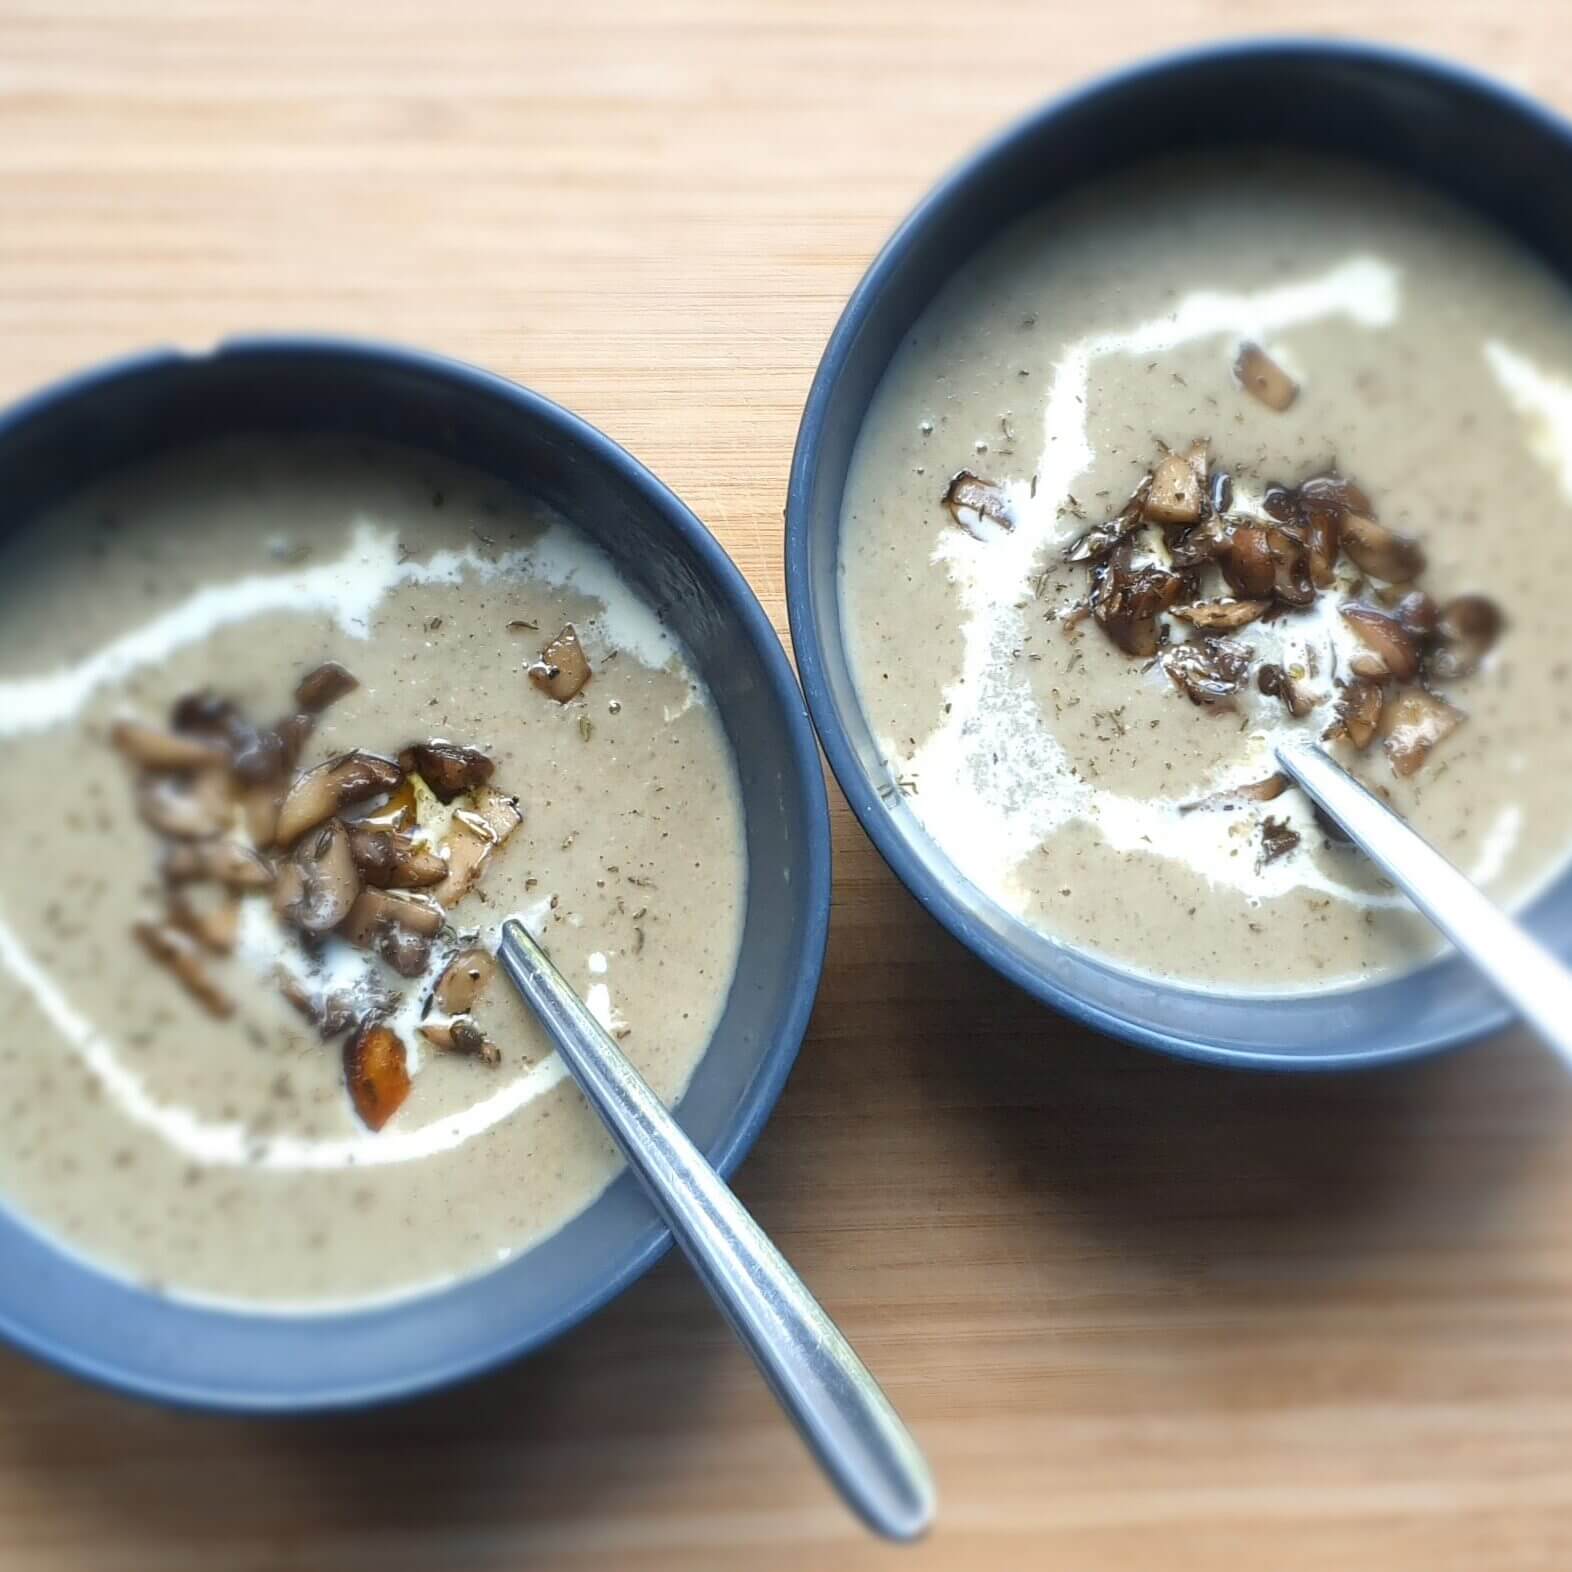 Homemade Creamy Mushroom Soup on a wooden plate in two bowls.